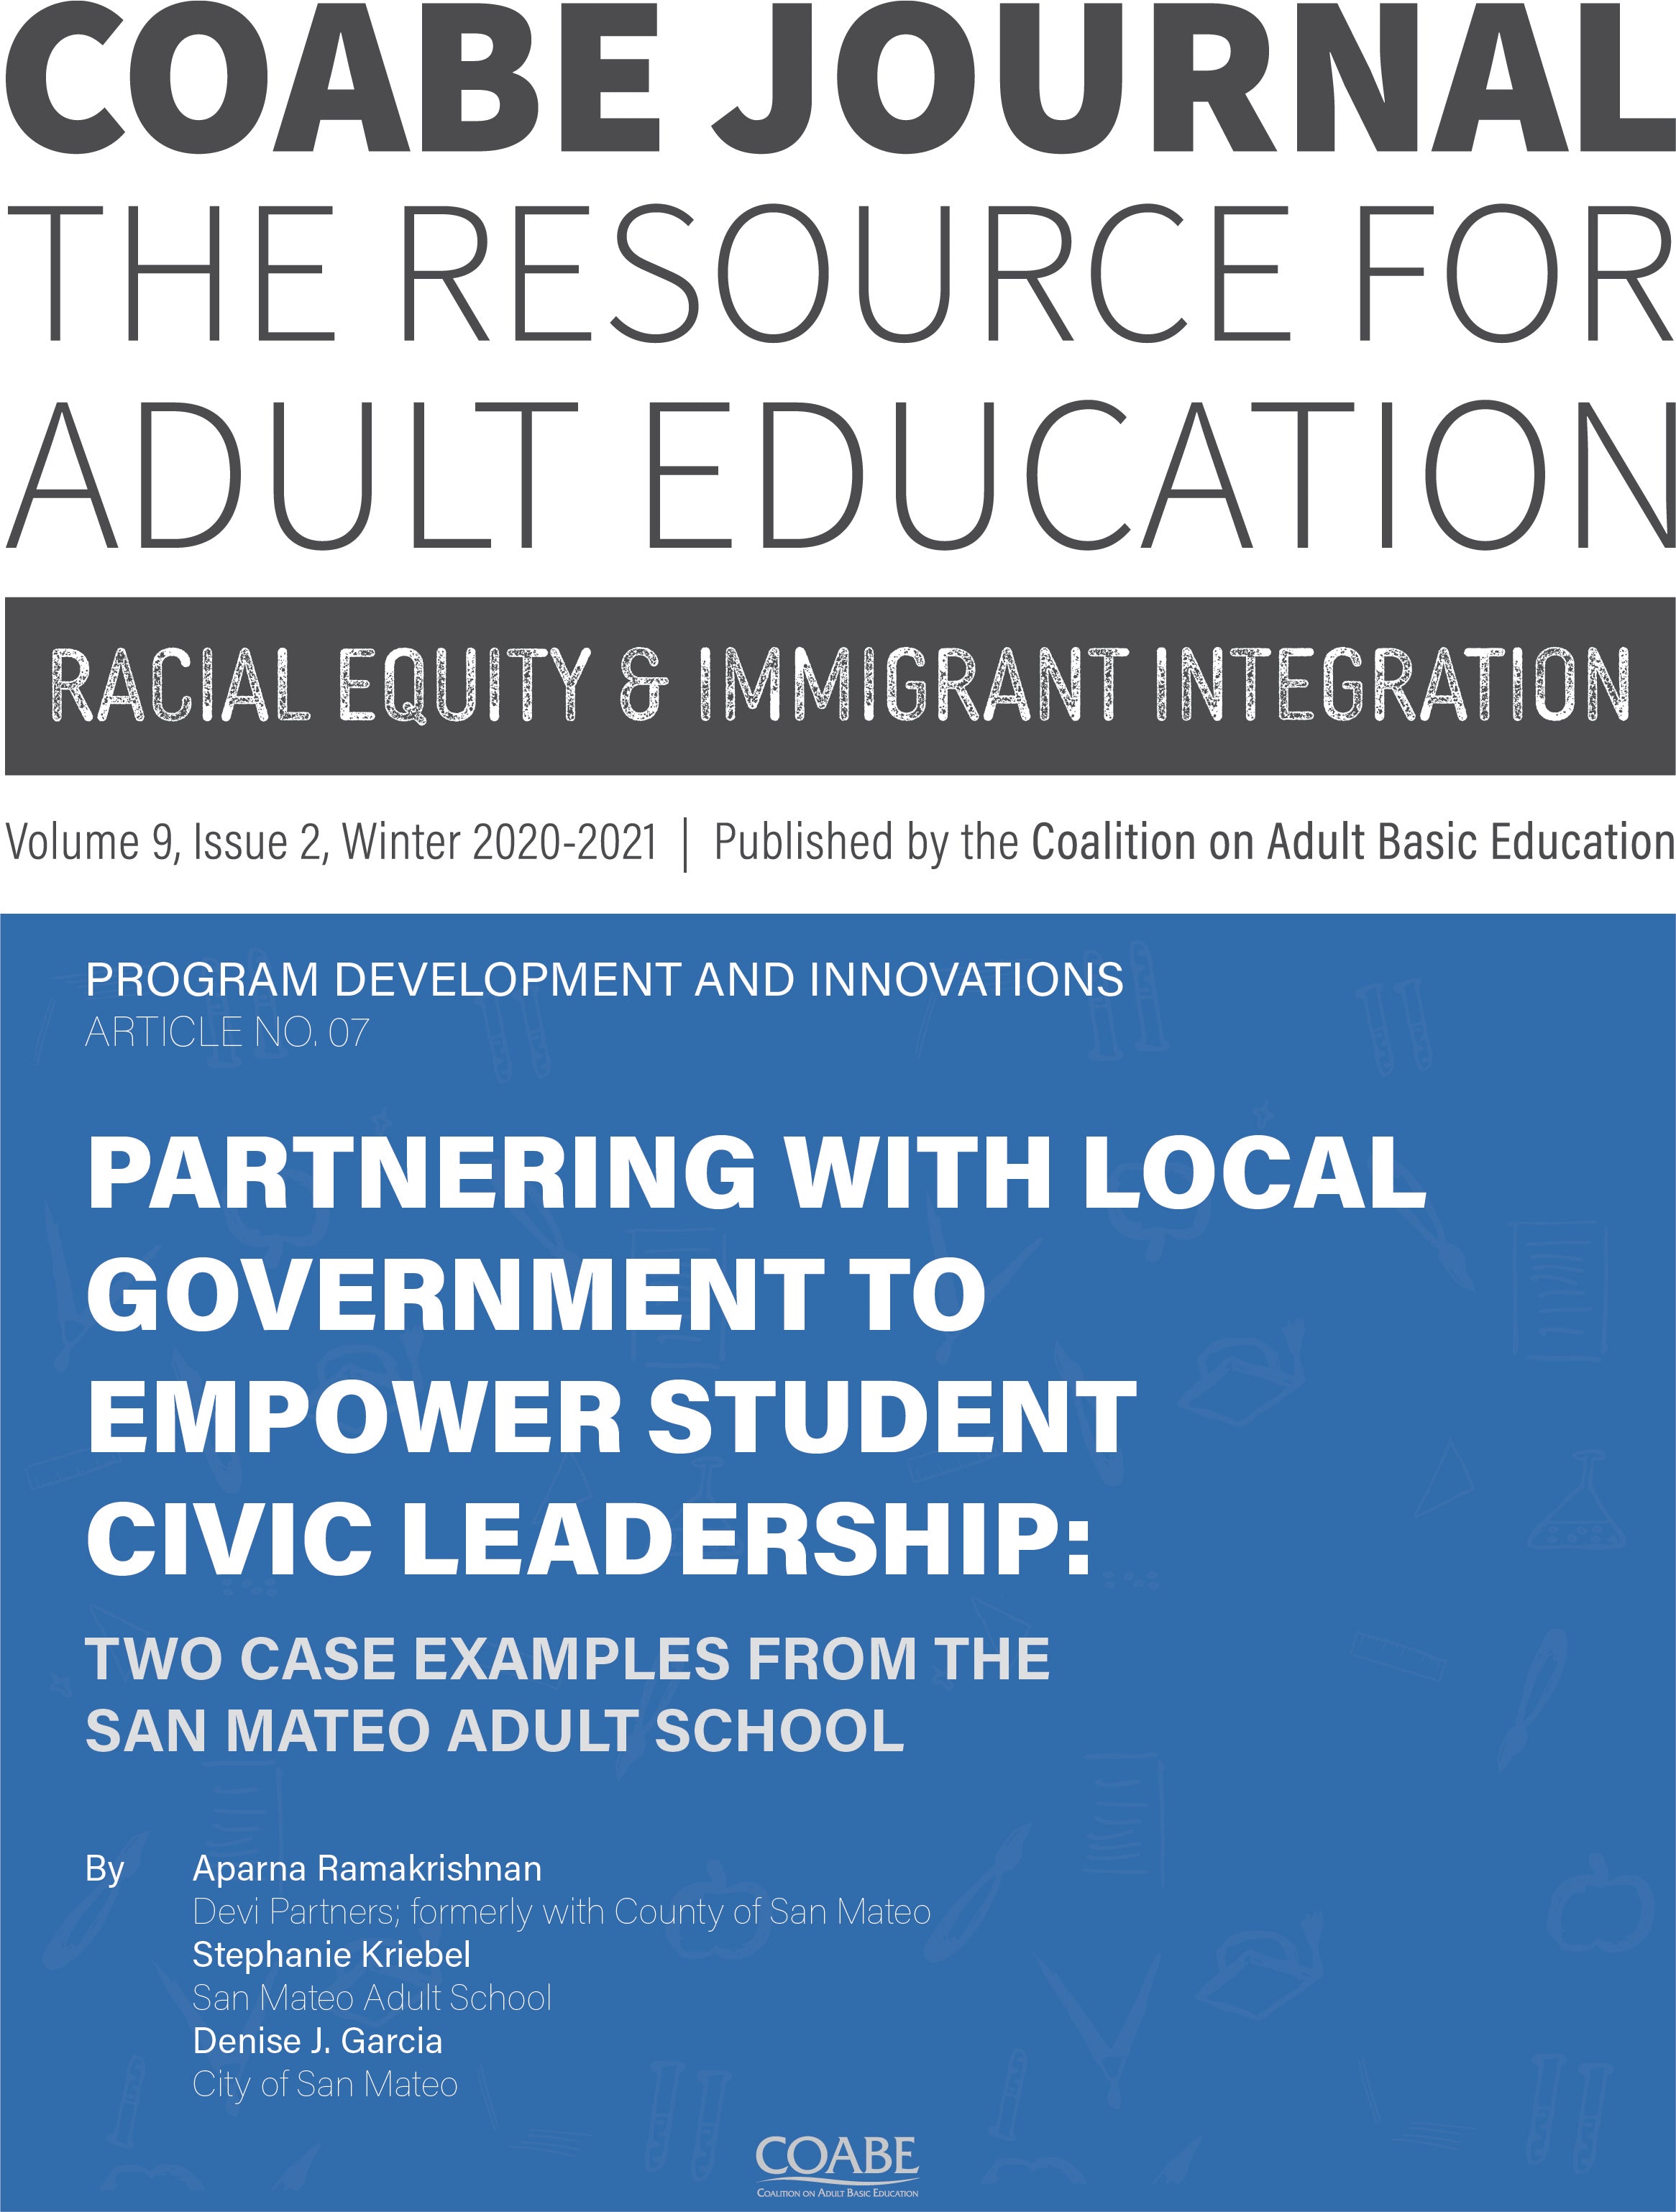 Article 07 / Partnering with Local Government to Empower Student Civic Leadership